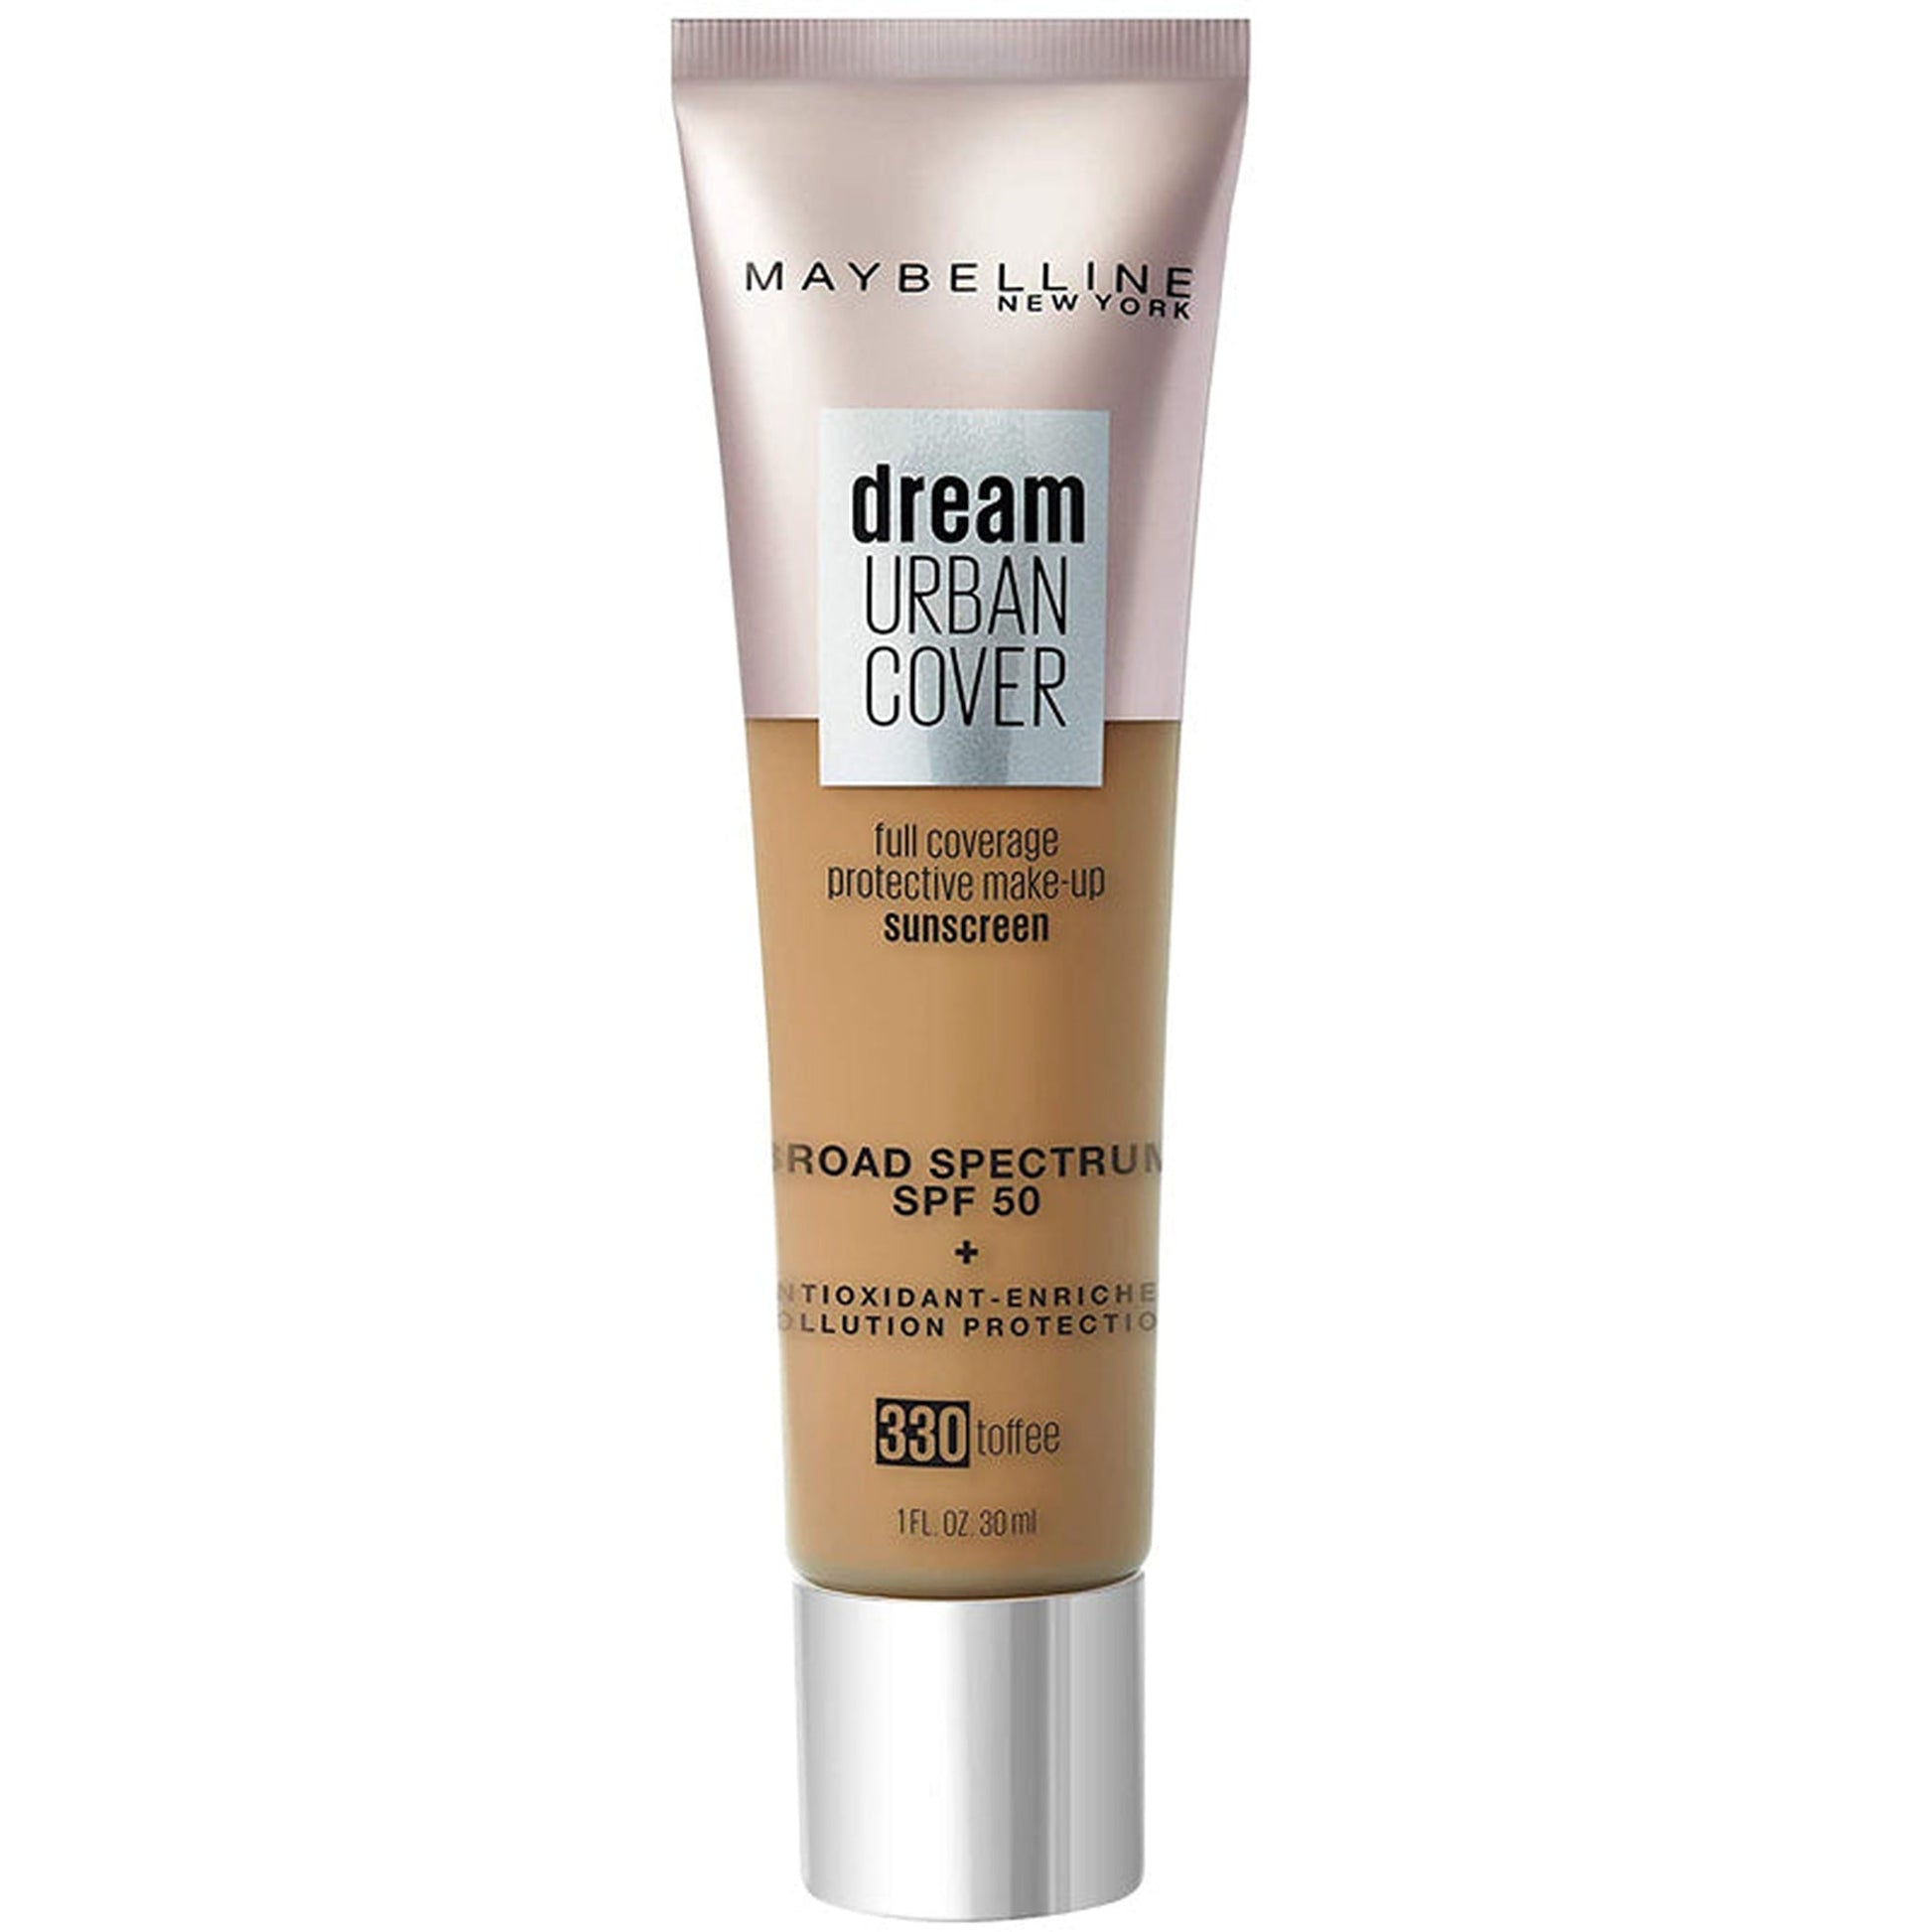 Maybeline Dream Urban Cover Foundation SPF50 - 330 Toffee-Maybelline-BeautyNmakeup.co.uk